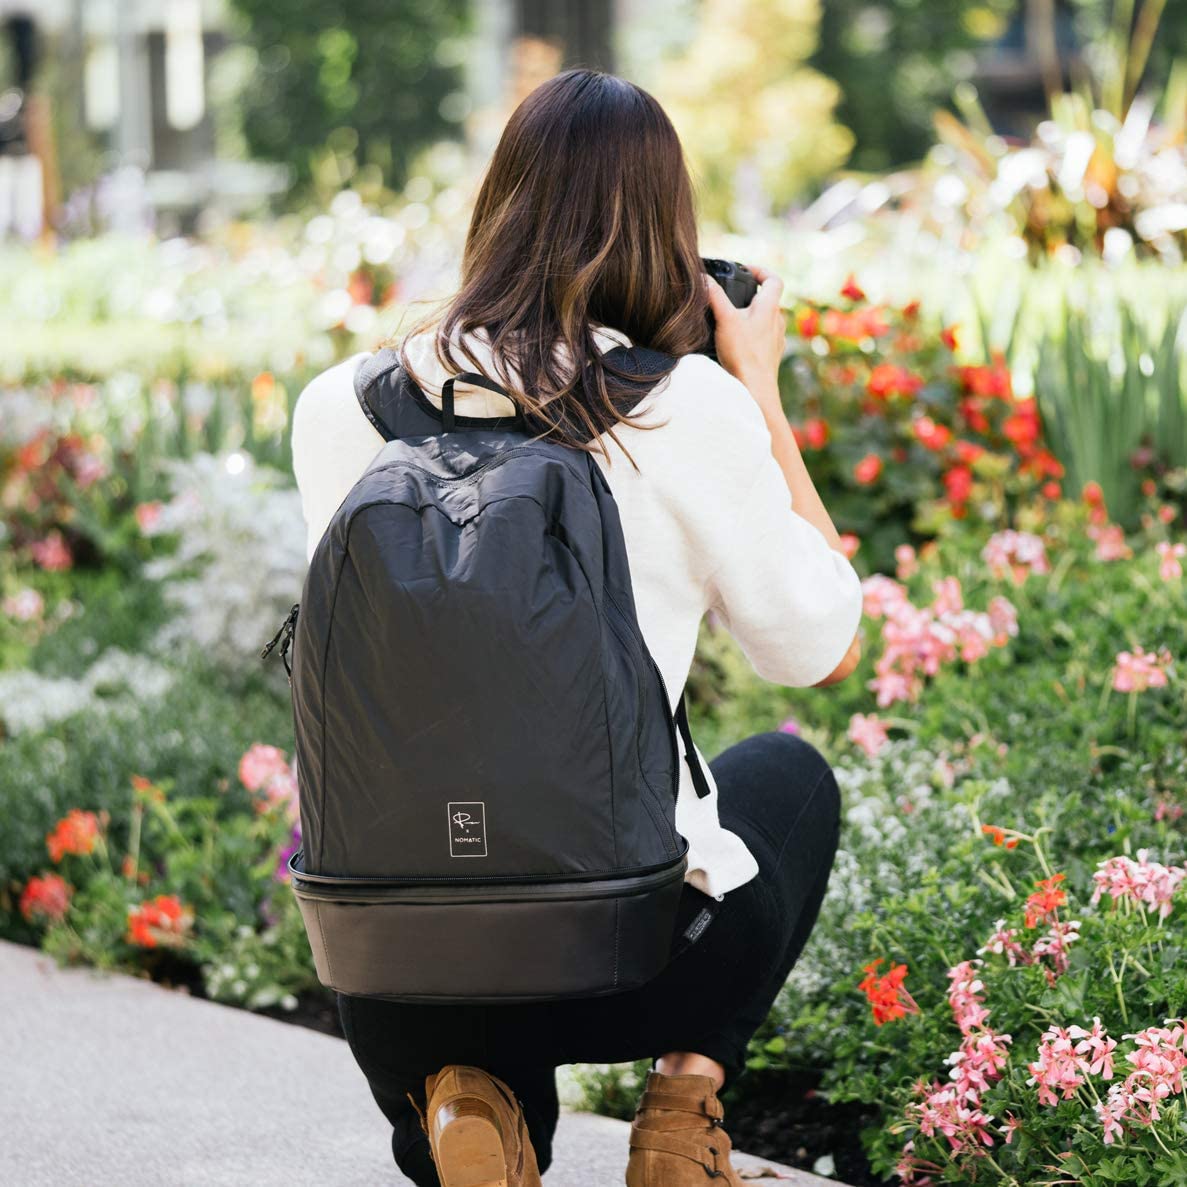 Peter McKinnon Backpack: The All-In-One Camera Bag